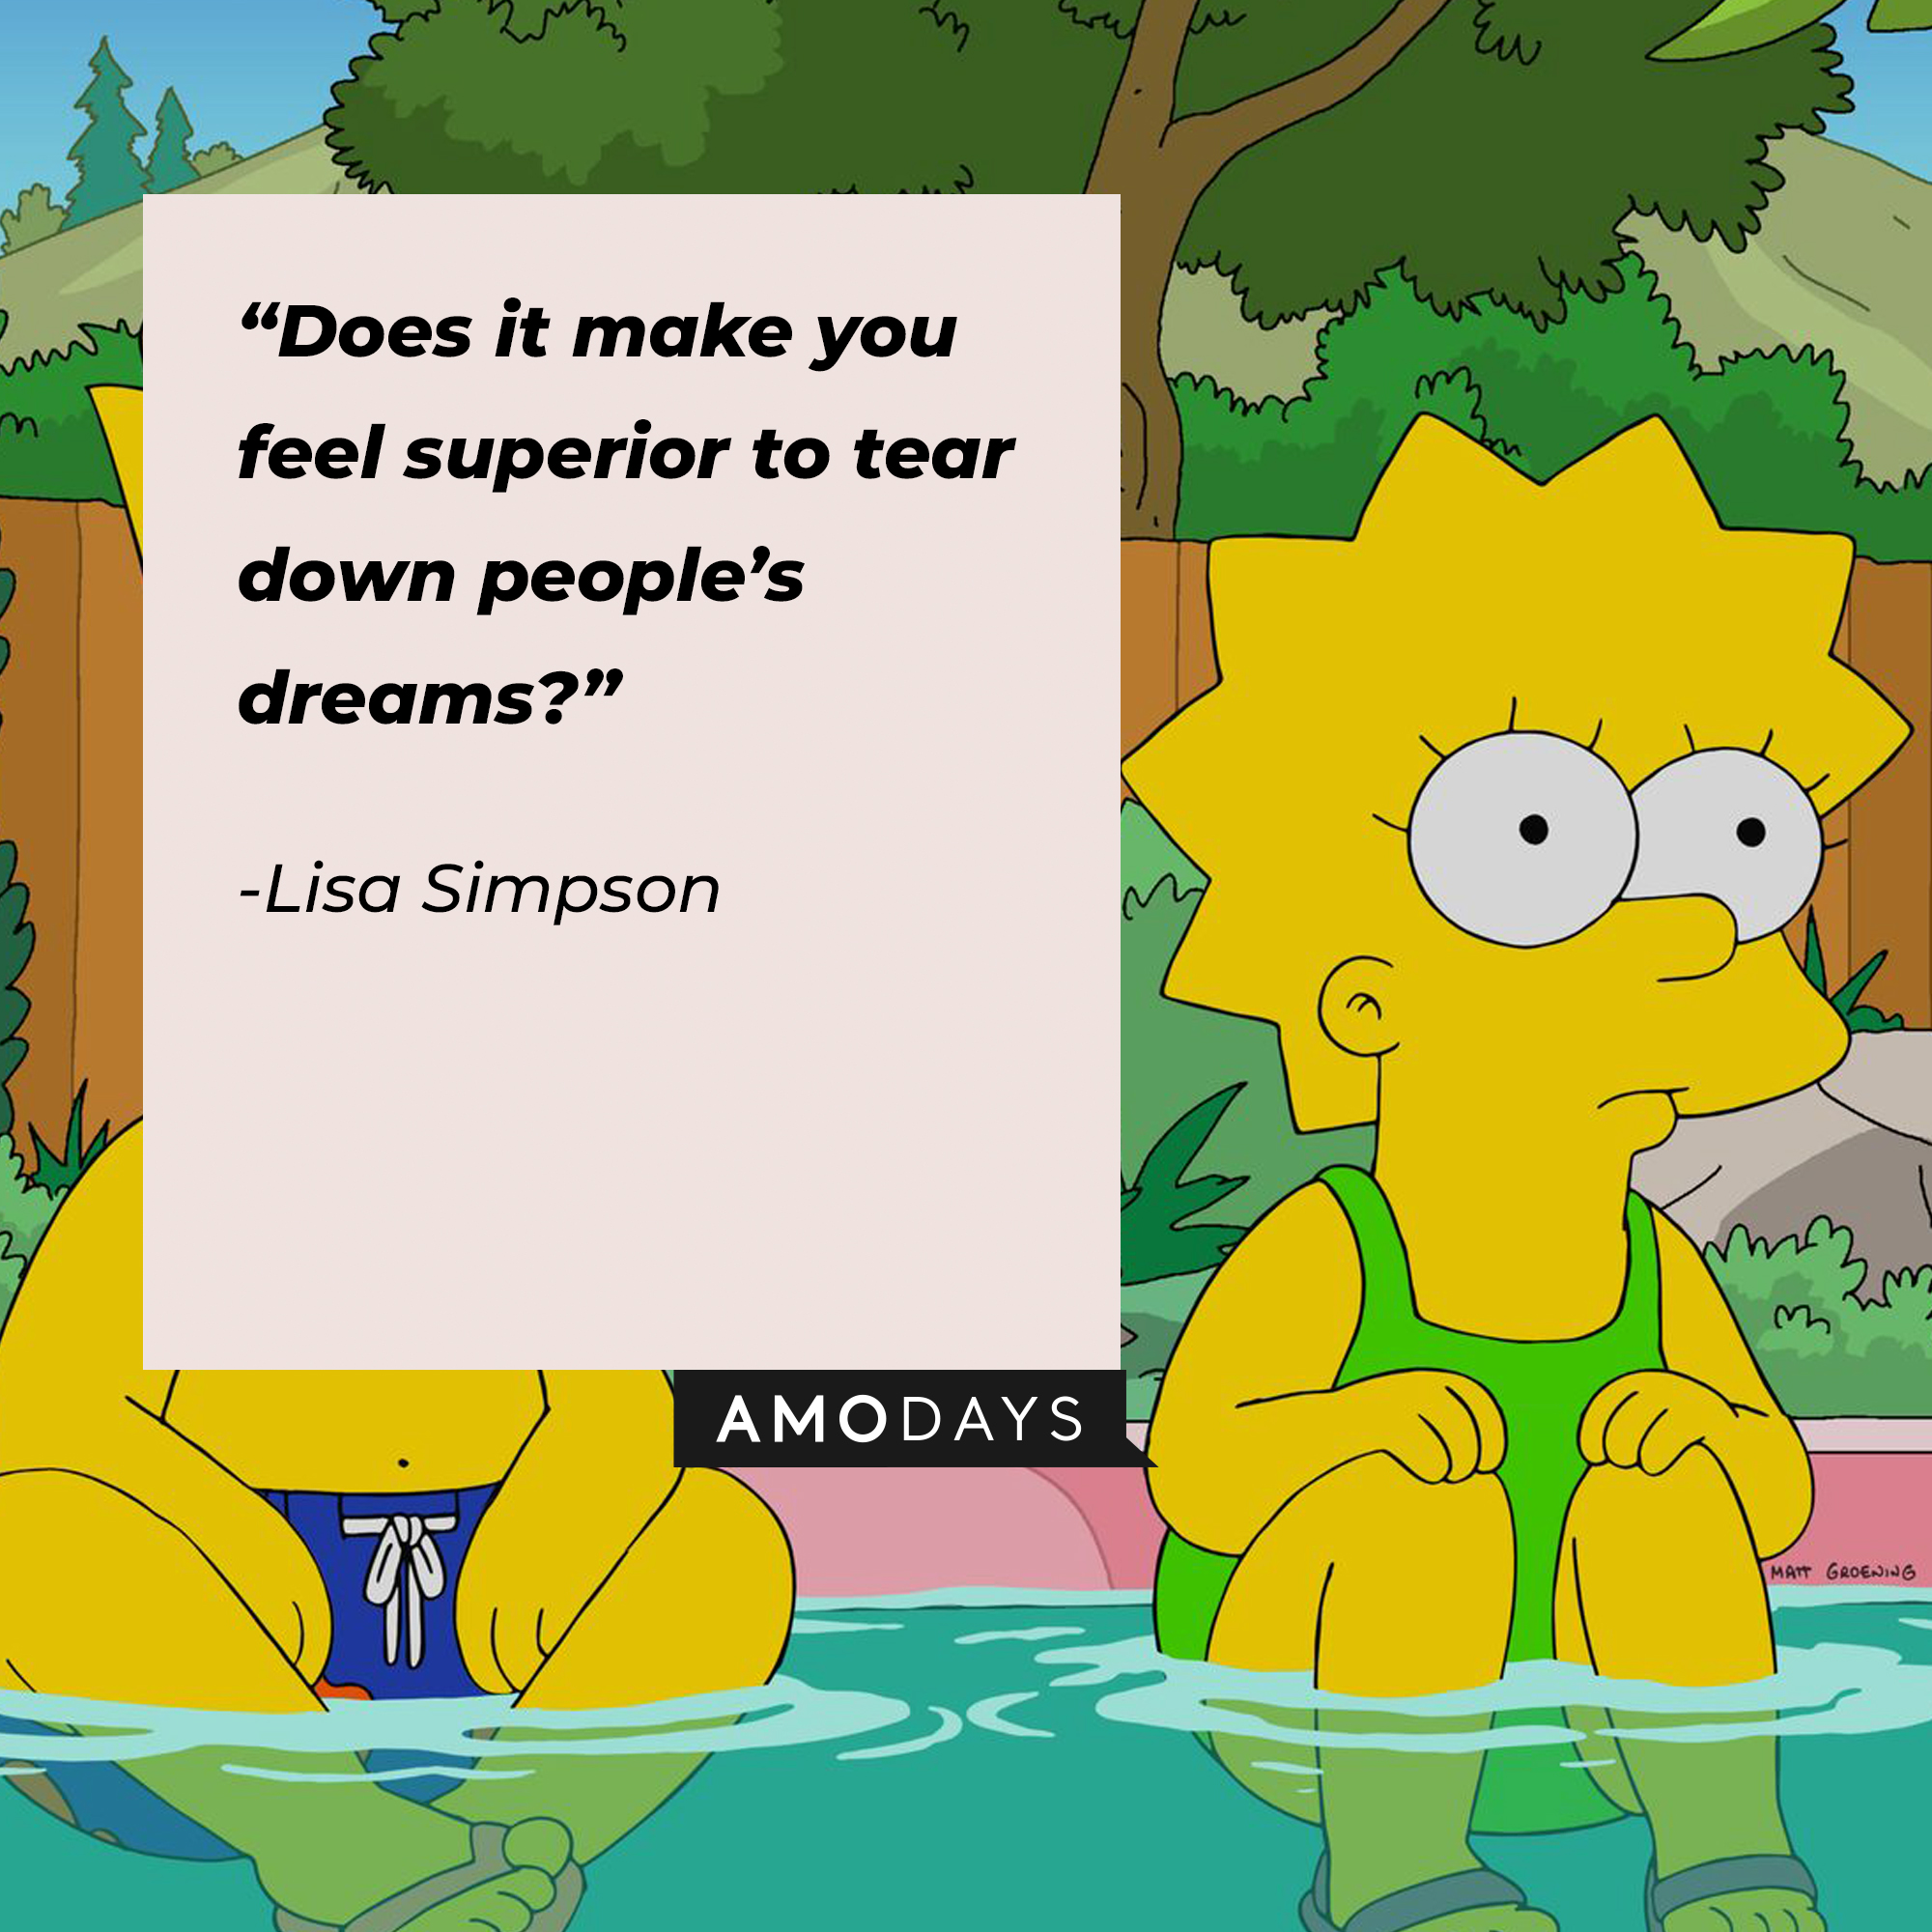 Lisa Simpson, with her quote: “Does it make you feel superior to tear down people’s dreams?” | Source: facebook.com/TheSimpsons